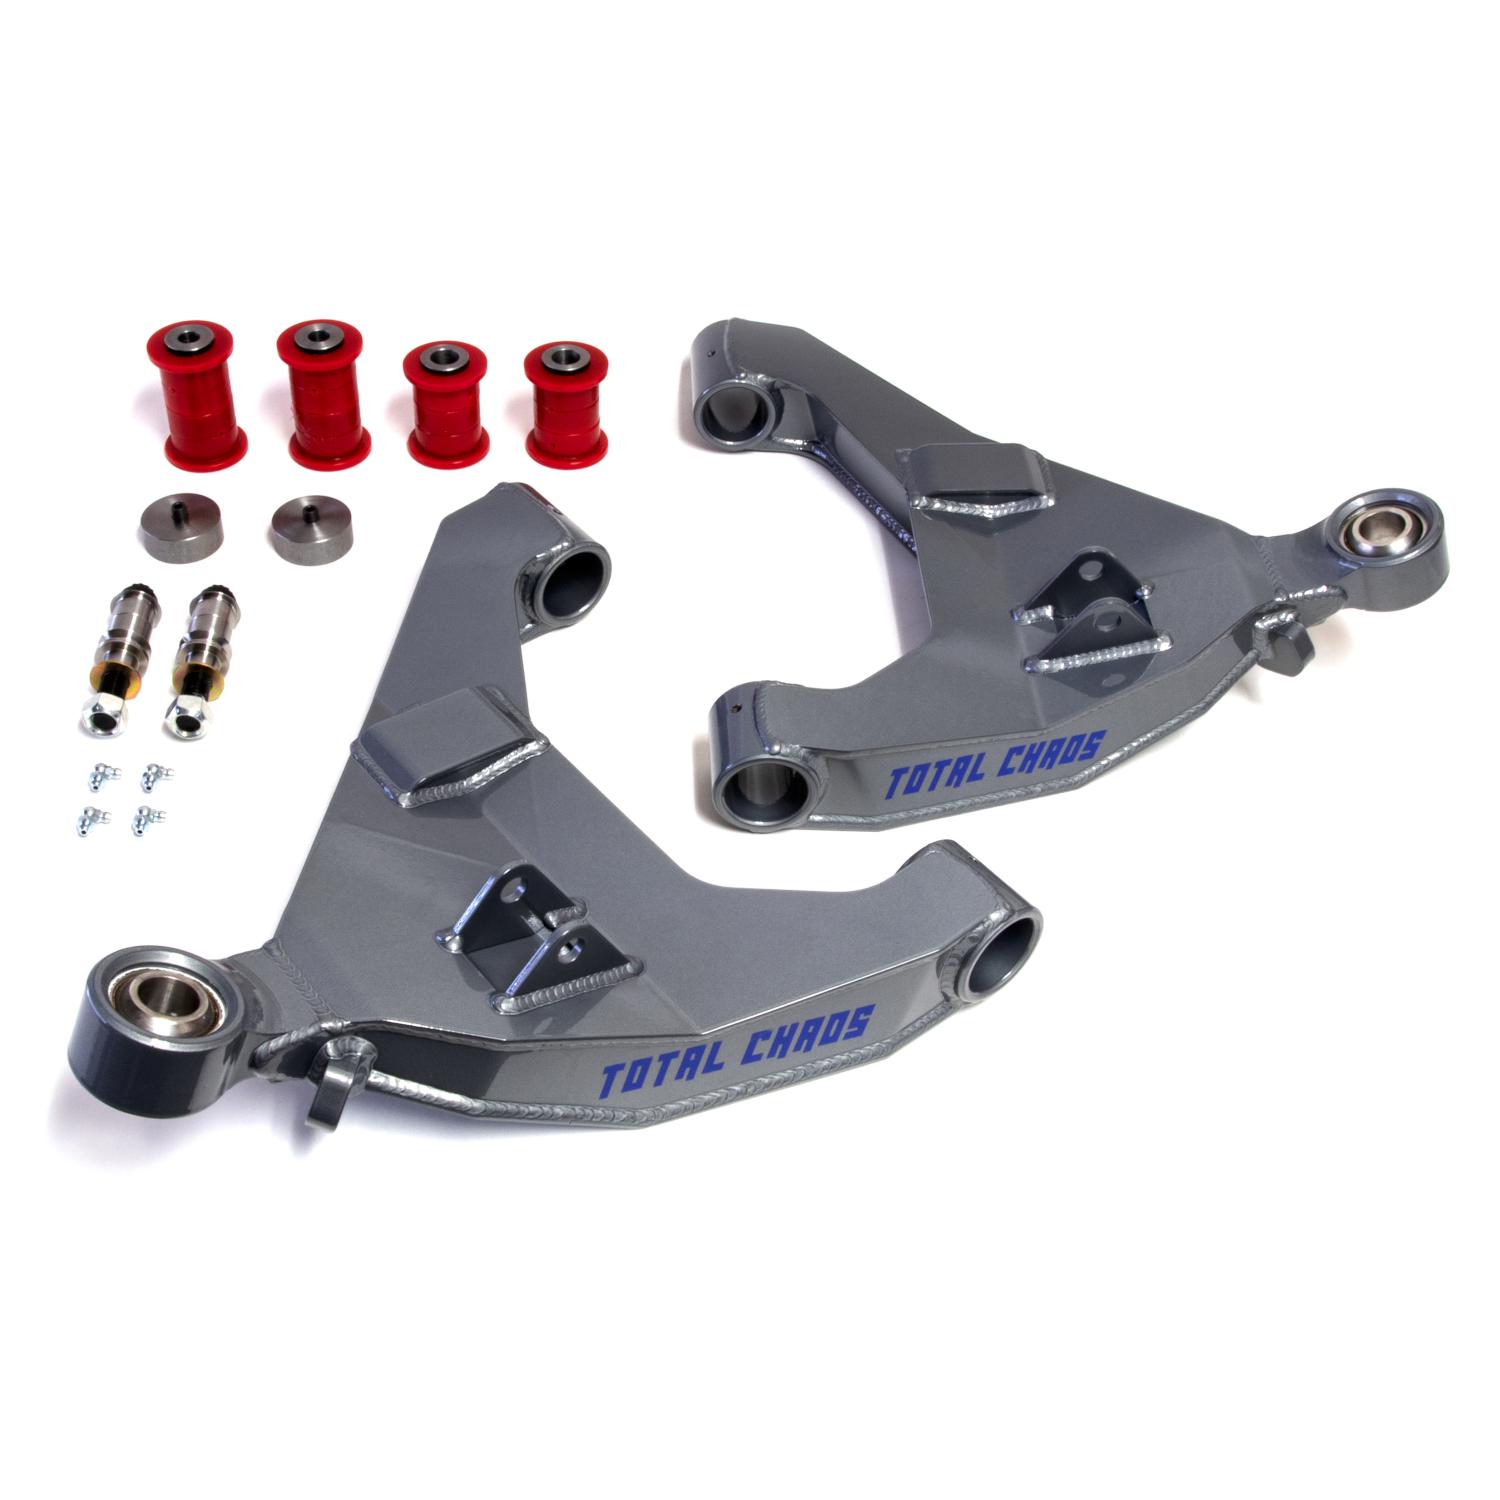 Total Chaos Stock Length 4130 Expedition Series Lower Control Arms - No Secondary Shock Mounts 2010-2014 FJ Cruiser